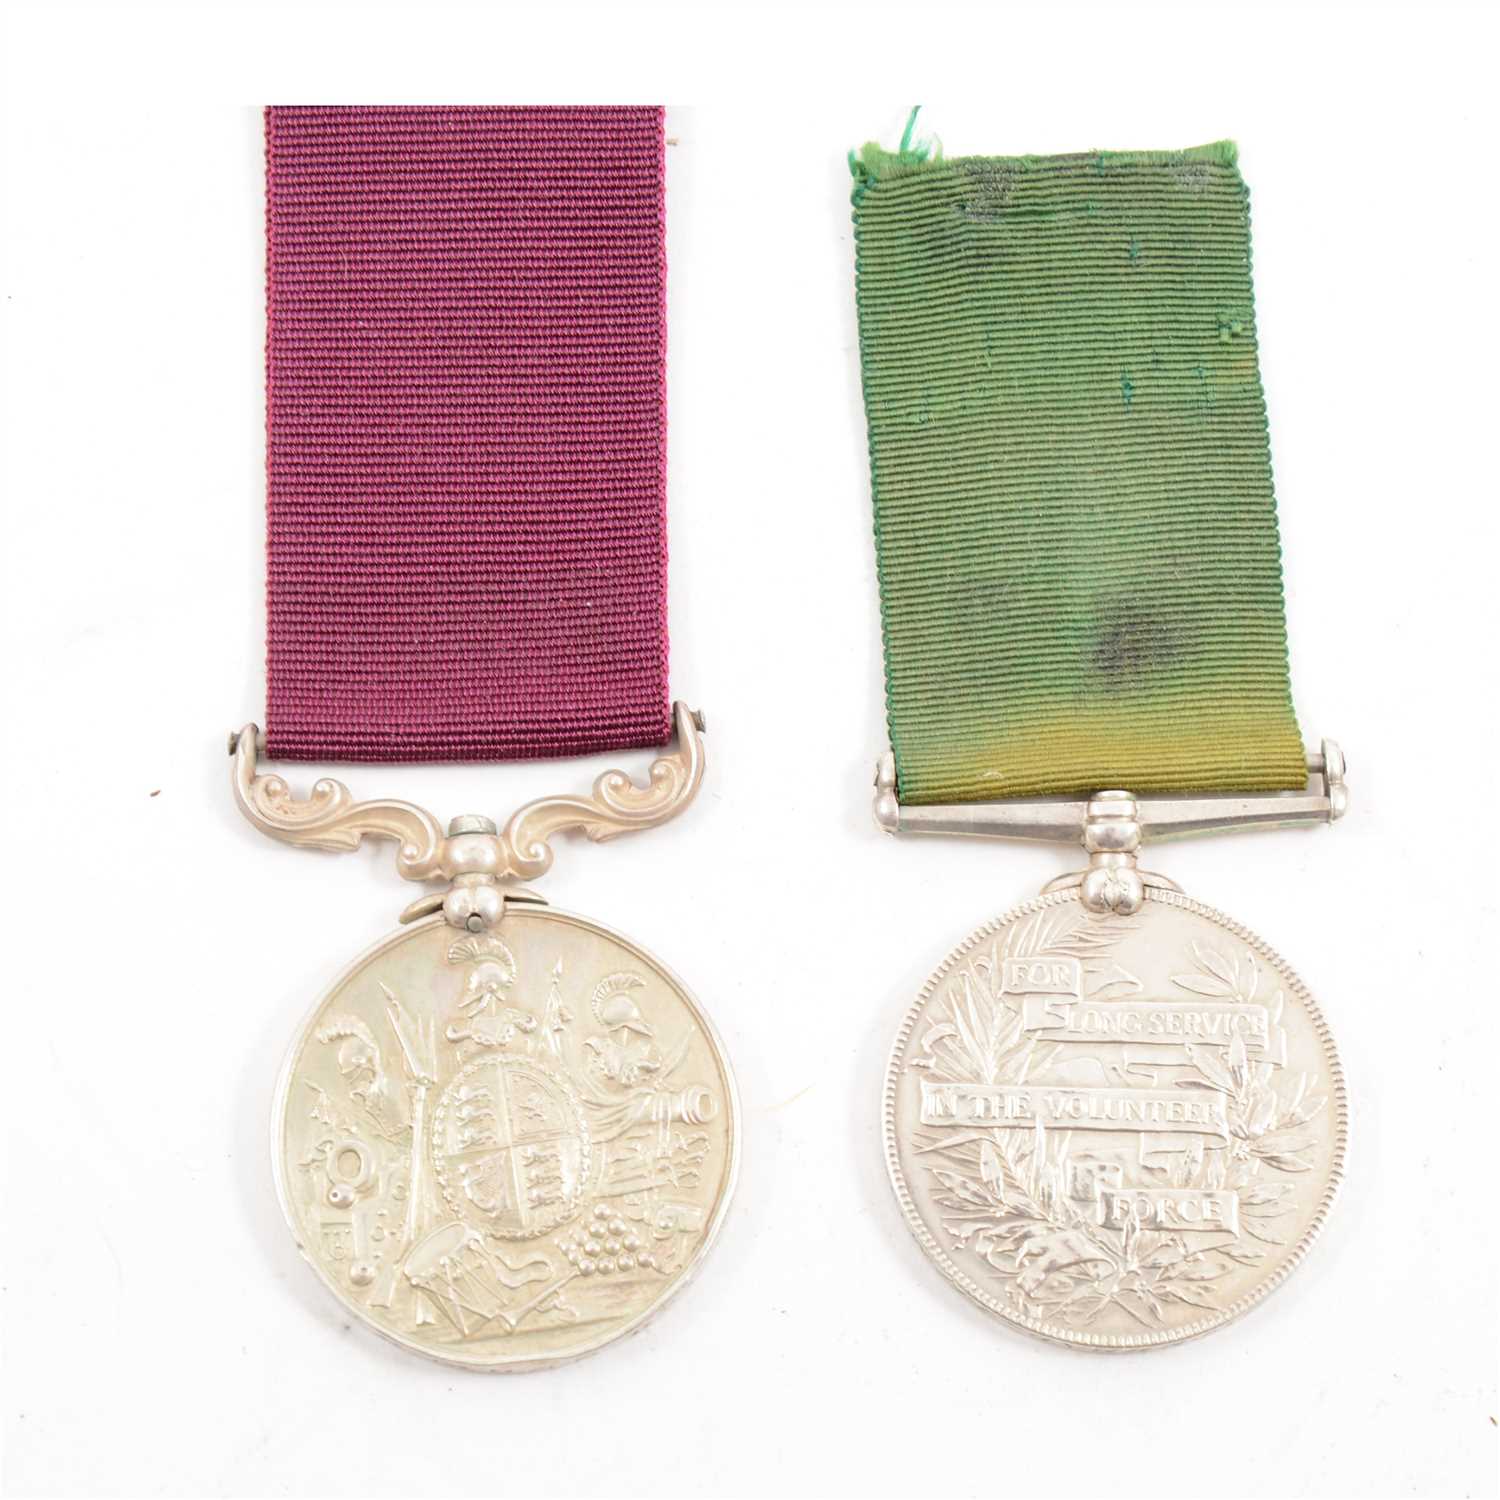 Lot 158 - Volunteer Force Long Service Medal,  Victoria Regina; and an Army Long Service and Good Conduct Medal.